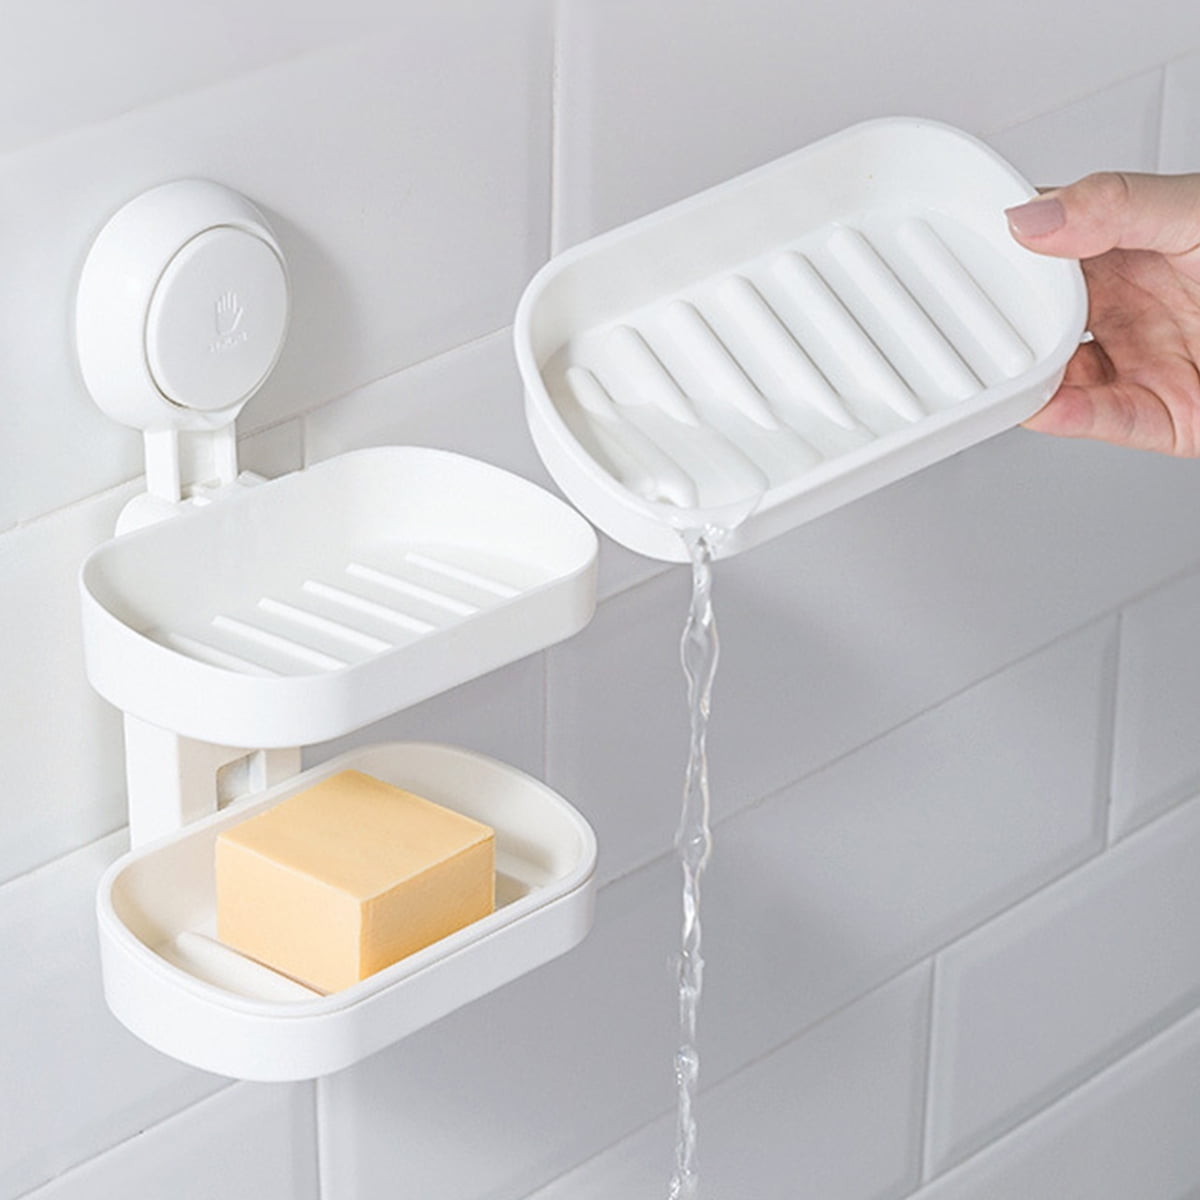 Buy Juzr 2 Layer Soap Dish for Shower with Suction Cup, Shower